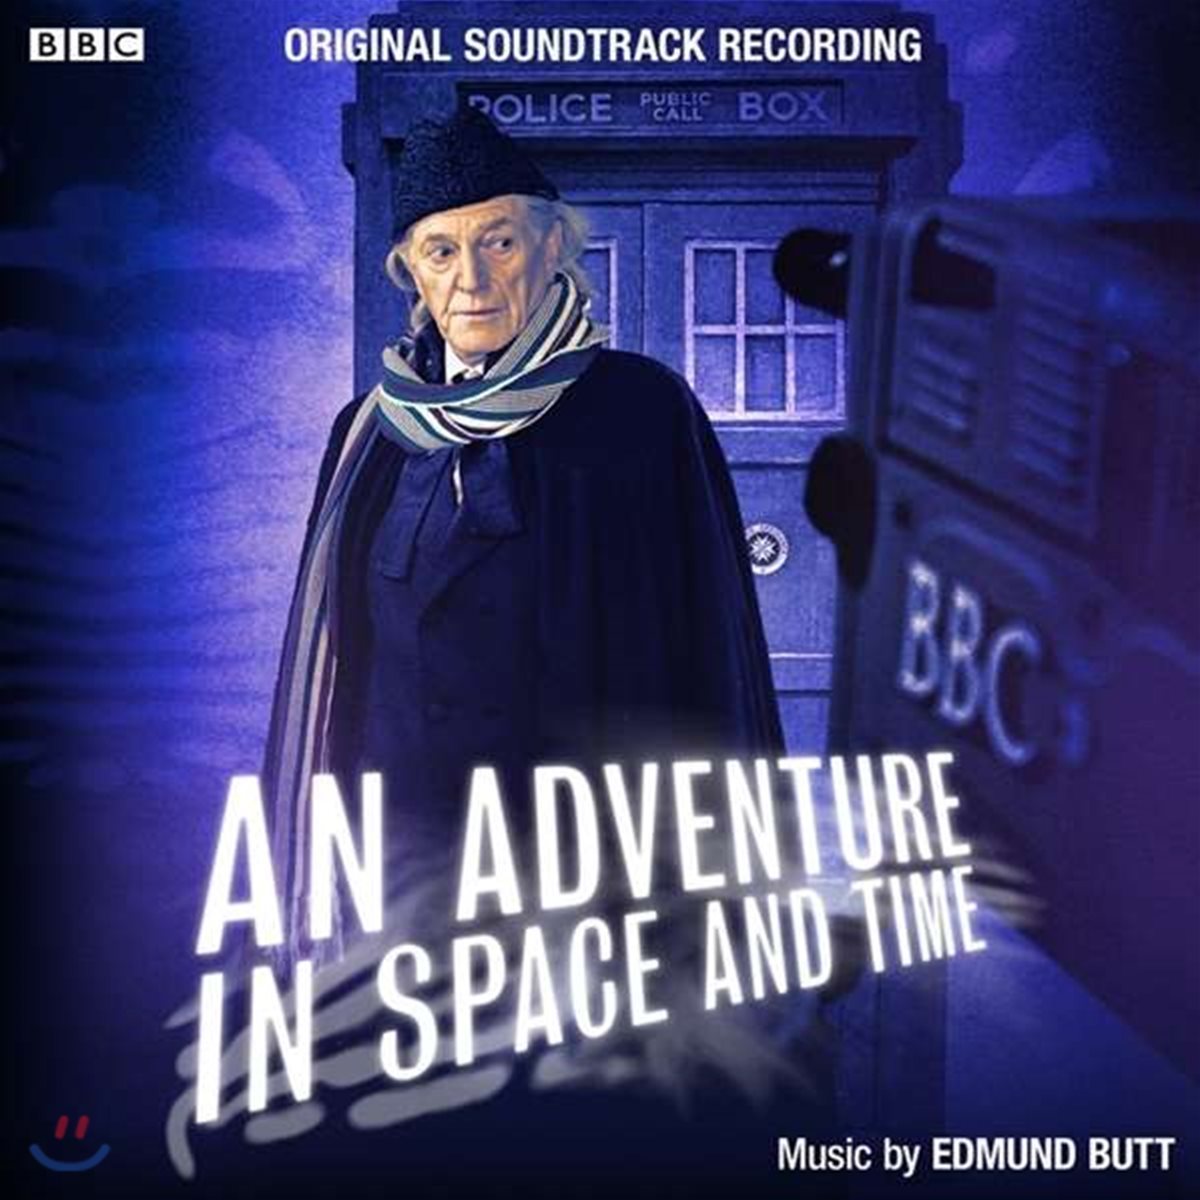 BBC 닥터 후 50주년 다큐멘터리음악 (An Adventure In Space and Time OST by Edmund Butt)